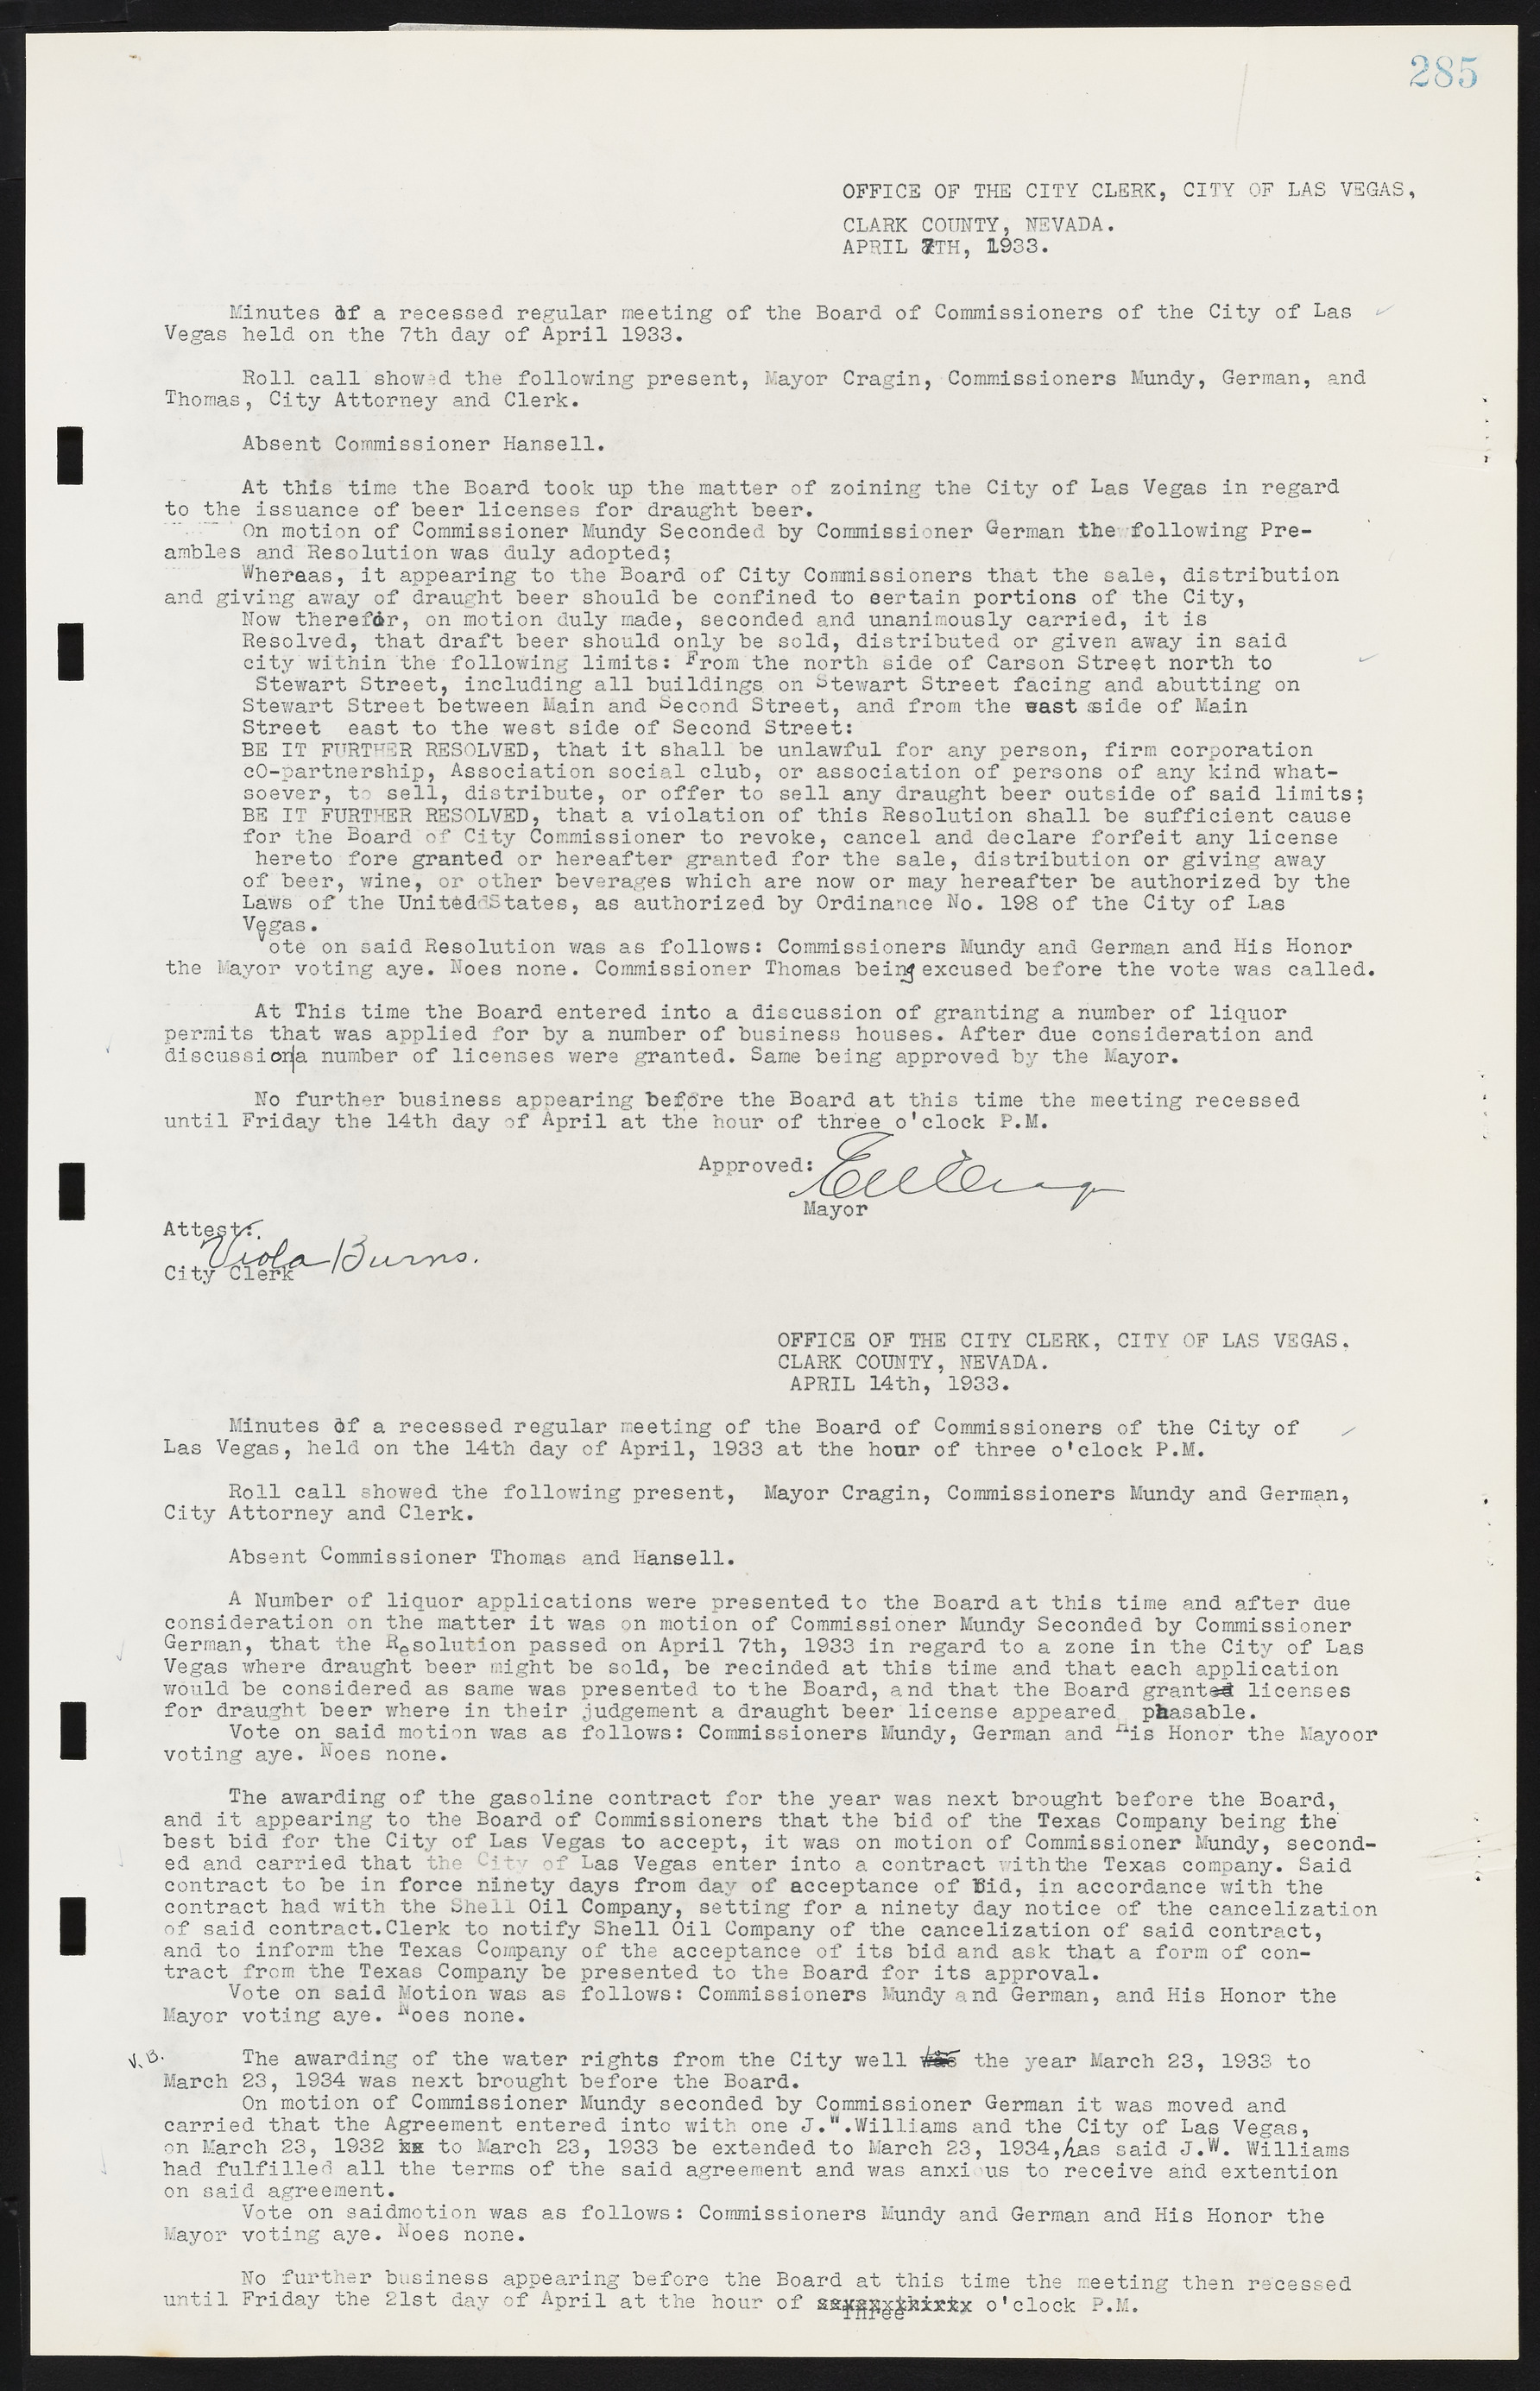 Las Vegas City Commission Minutes, May 14, 1929 to February 11, 1937, lvc000003-291